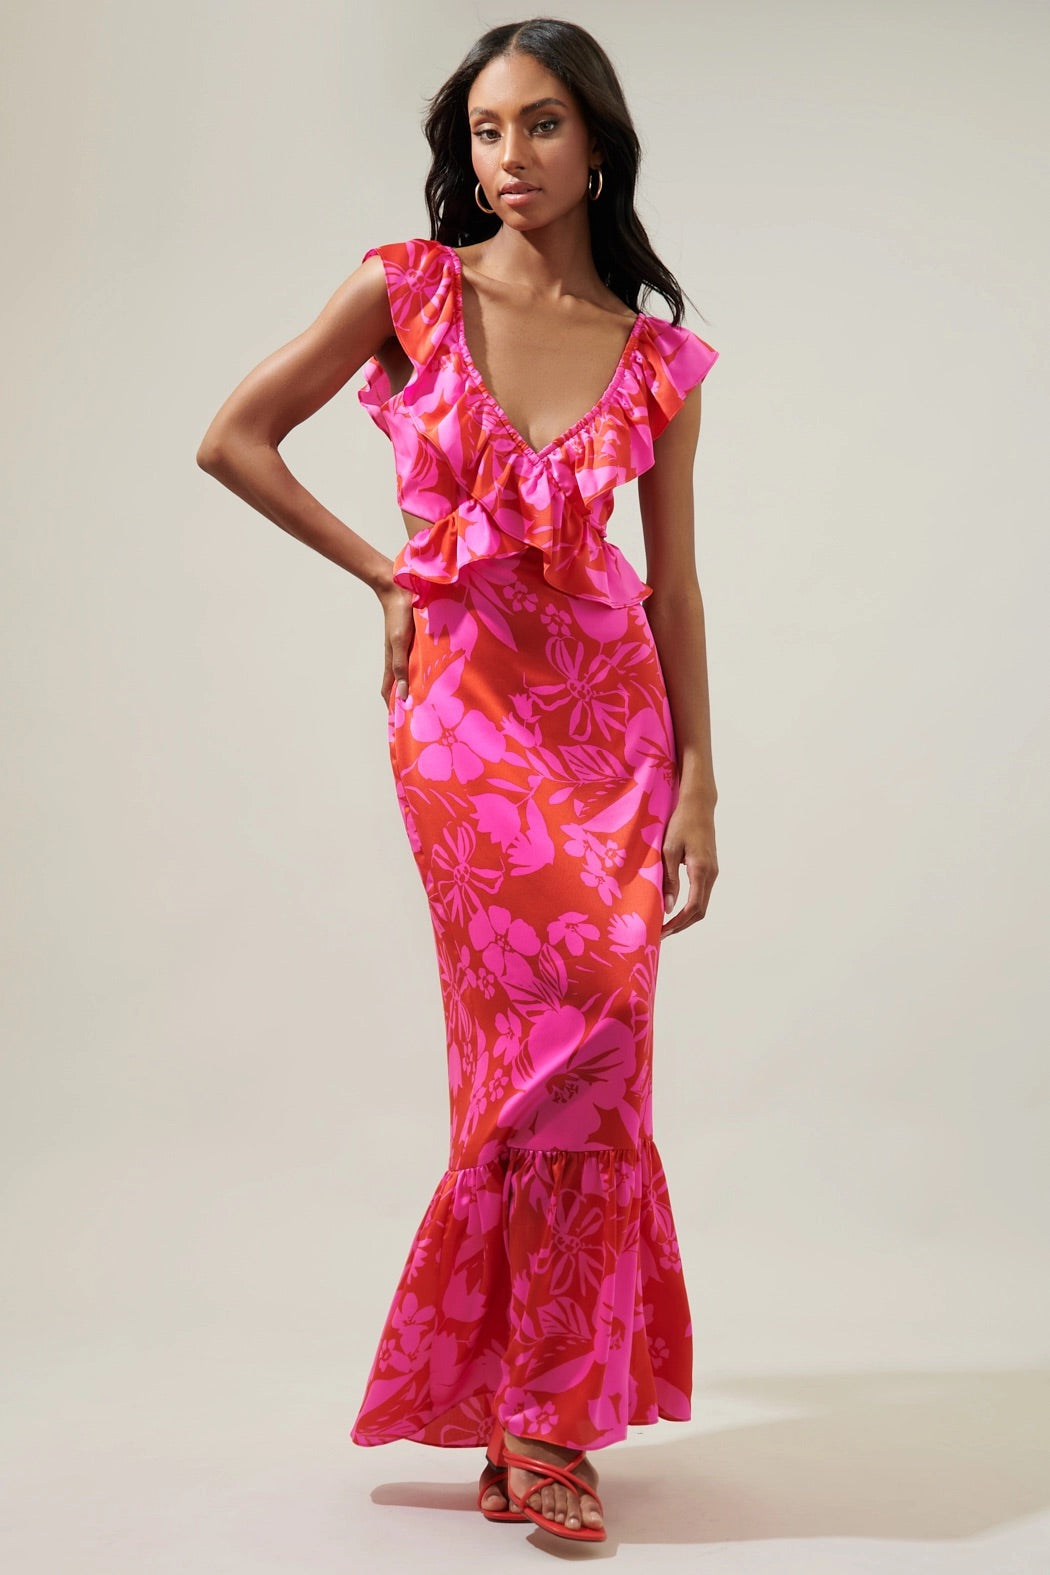 Gisele Floral Cut Out Mermaid Maxi Dress - Red/Pink